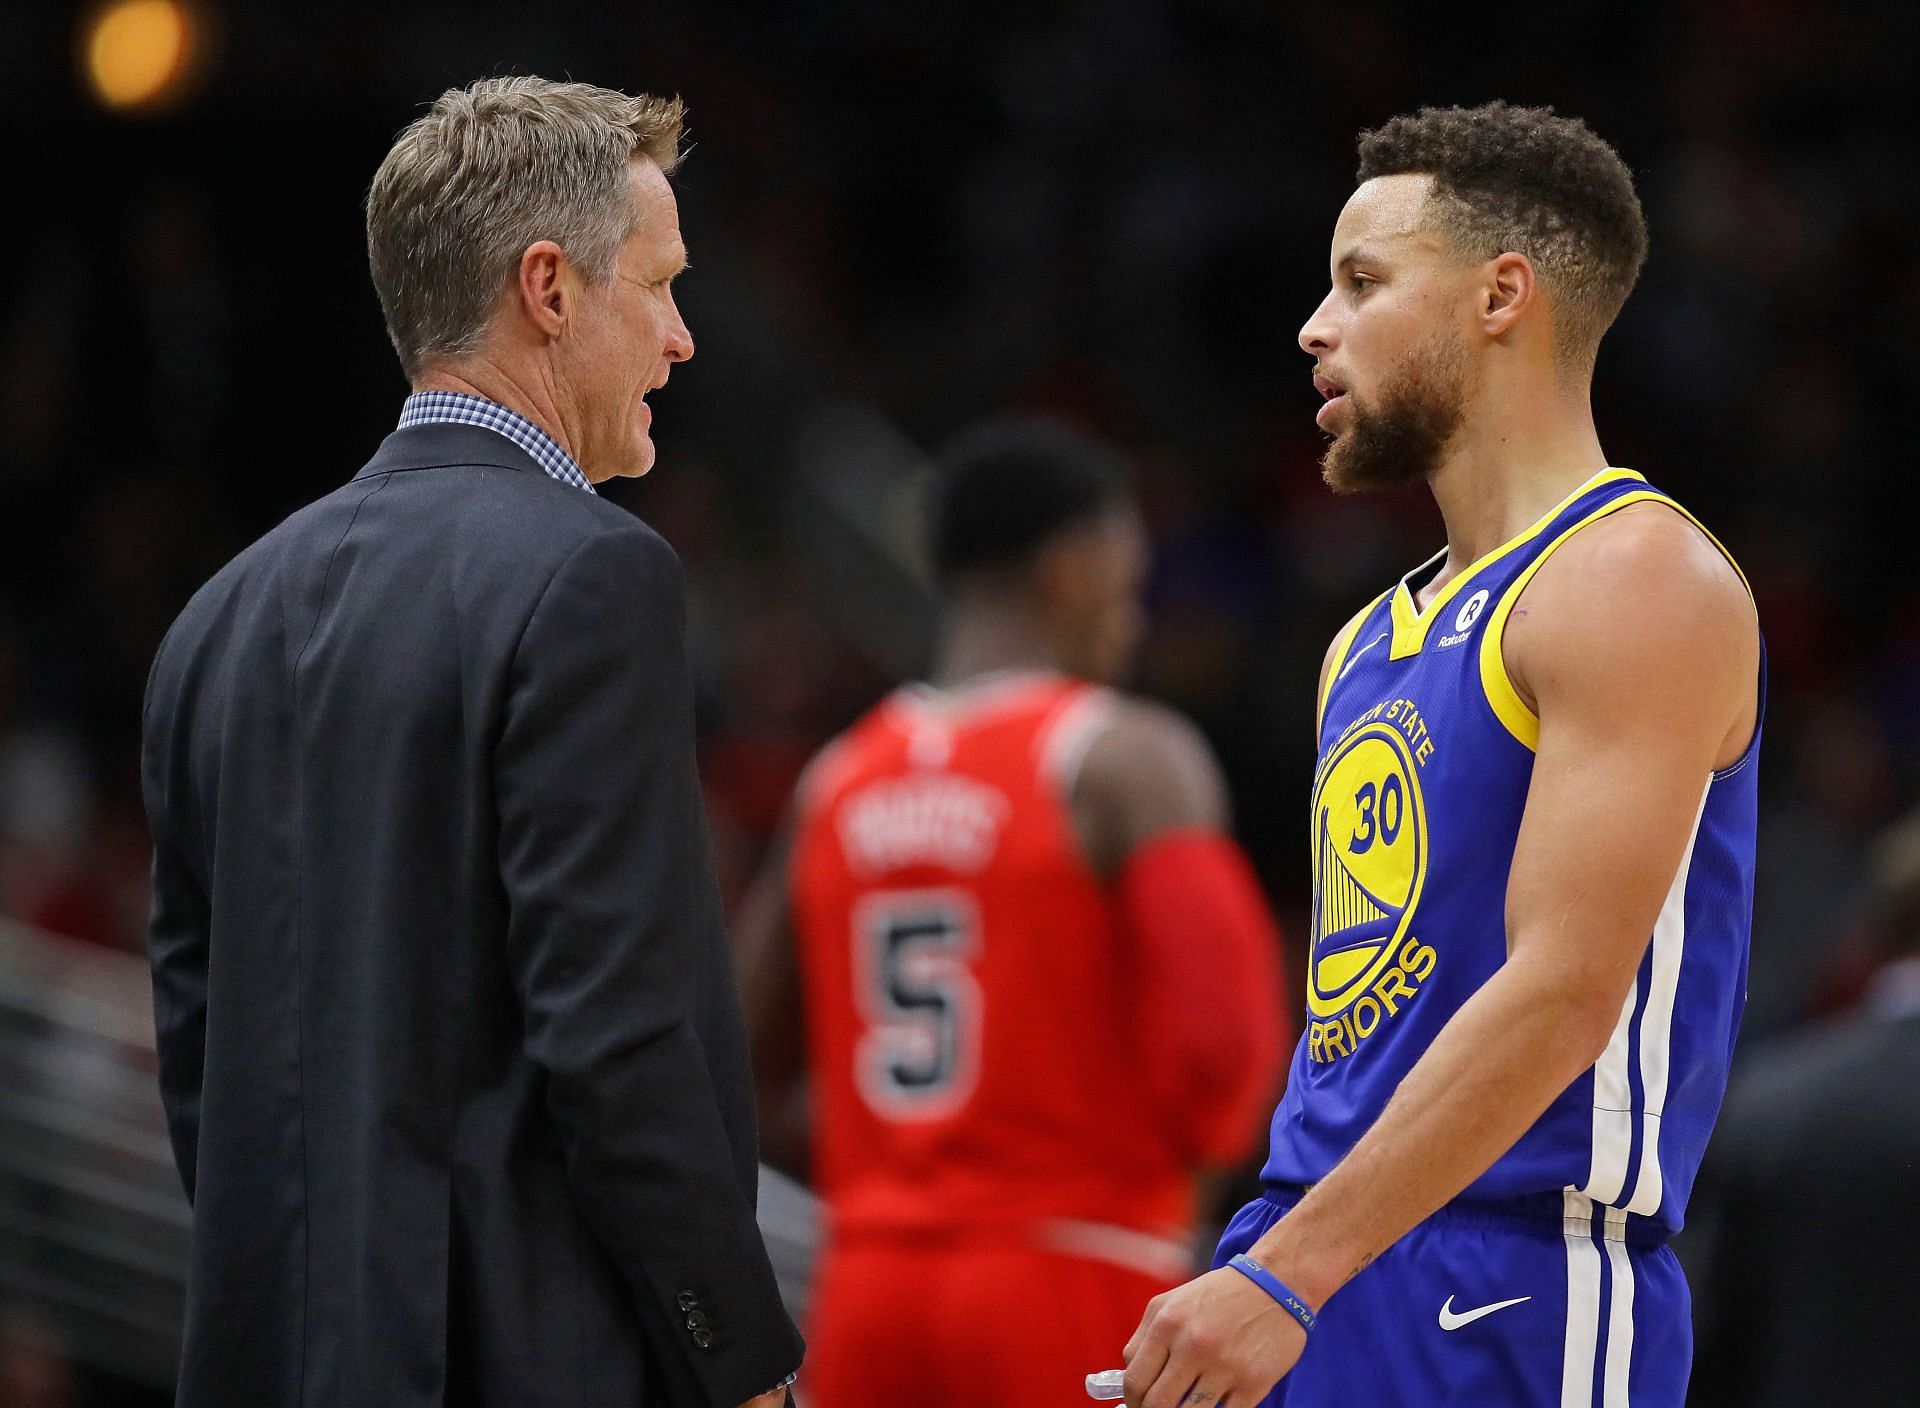 Steve Kerr discusses a game with Steph Curry